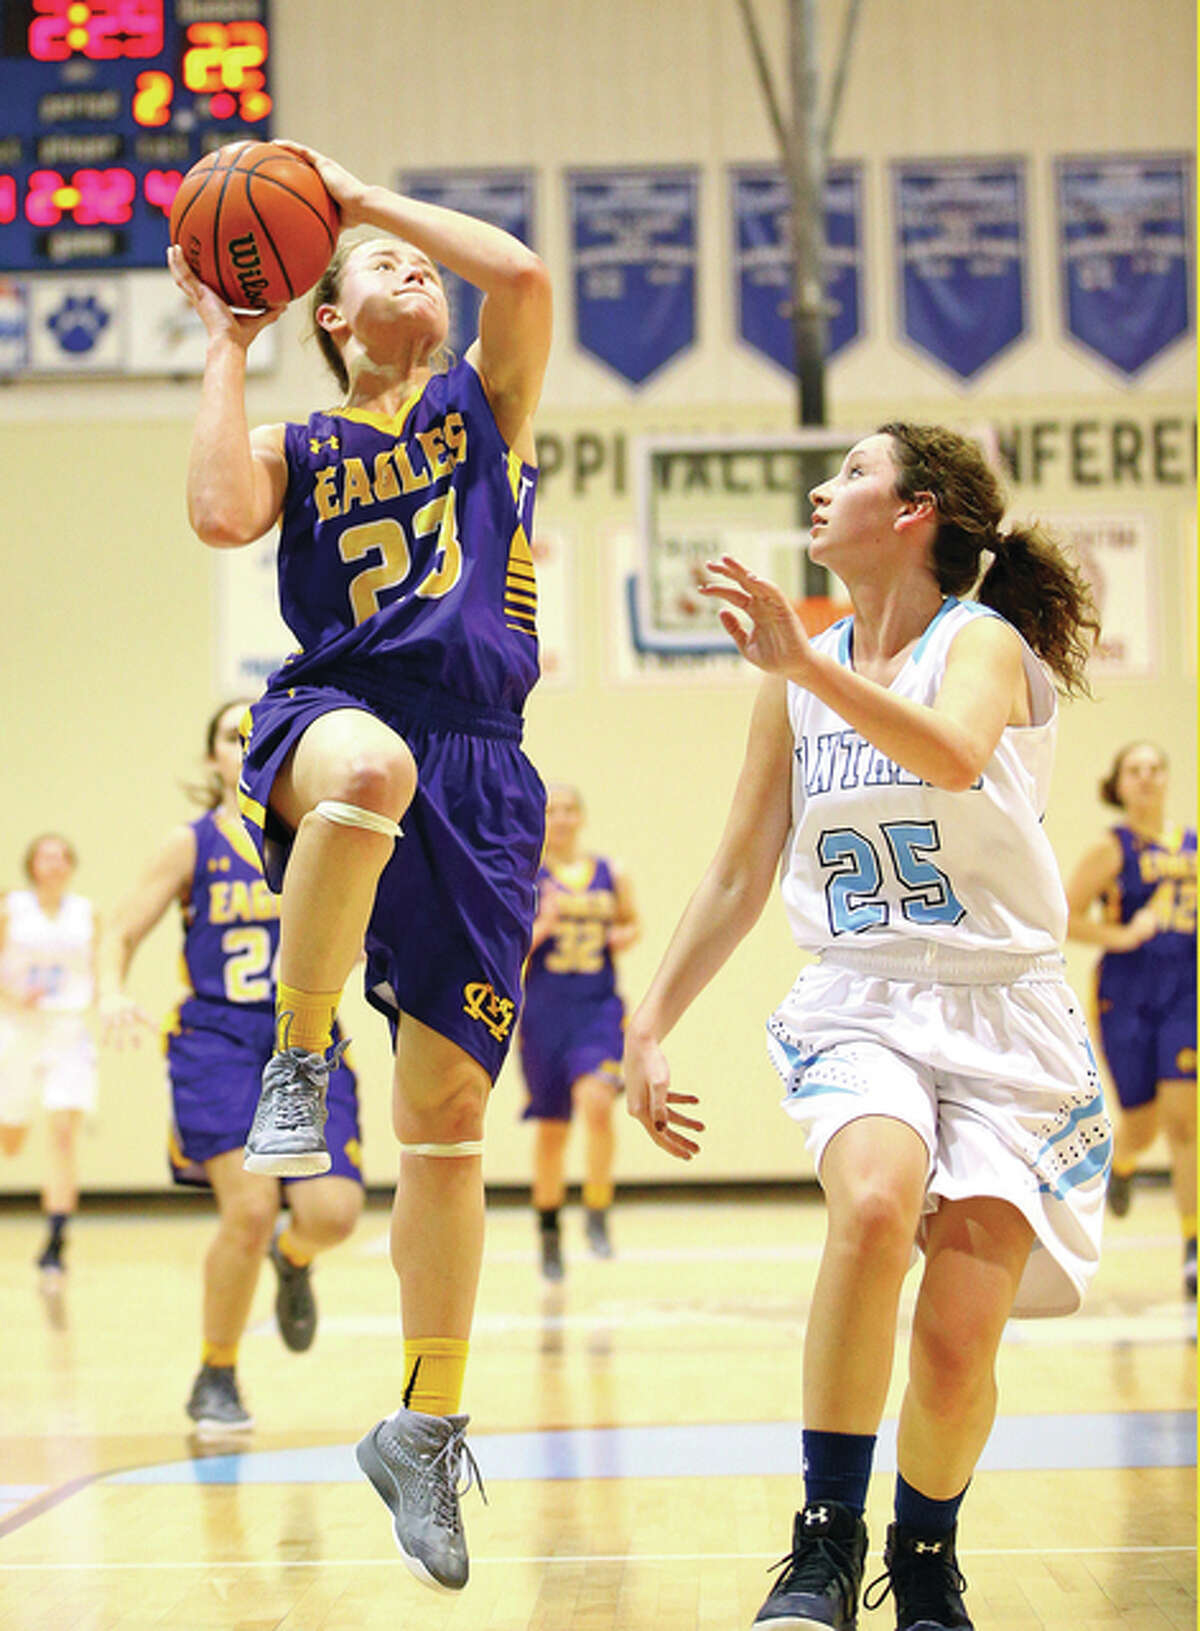 CM’s Allie Troeckler (left) puts up a shot over Jersey’s Ally Schroeder during a Dec. 28 tournament game at Jerseyville. Troeckler had 27 points and 12 rebounds in Tuesday’s semifinal win over Effingham at the Salem Class 3A Regional.